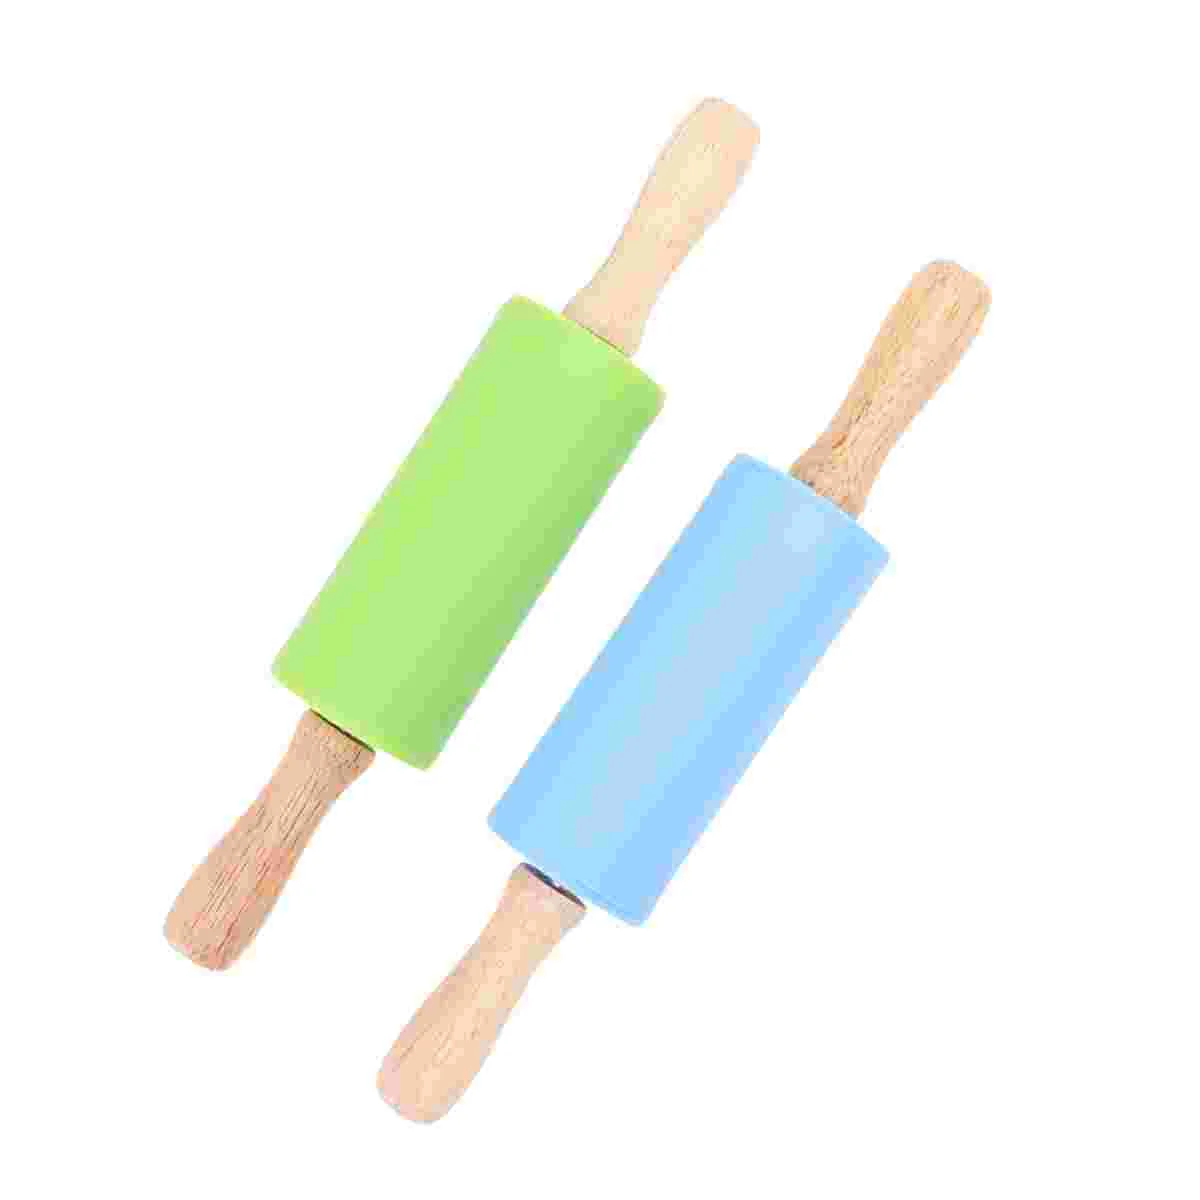 

Rolling Pin Silicone Bakingroller Stick Wood Kids Pastry Fondant Dough French Sticks Classicremovable Ring Pasta Wooden Dowel